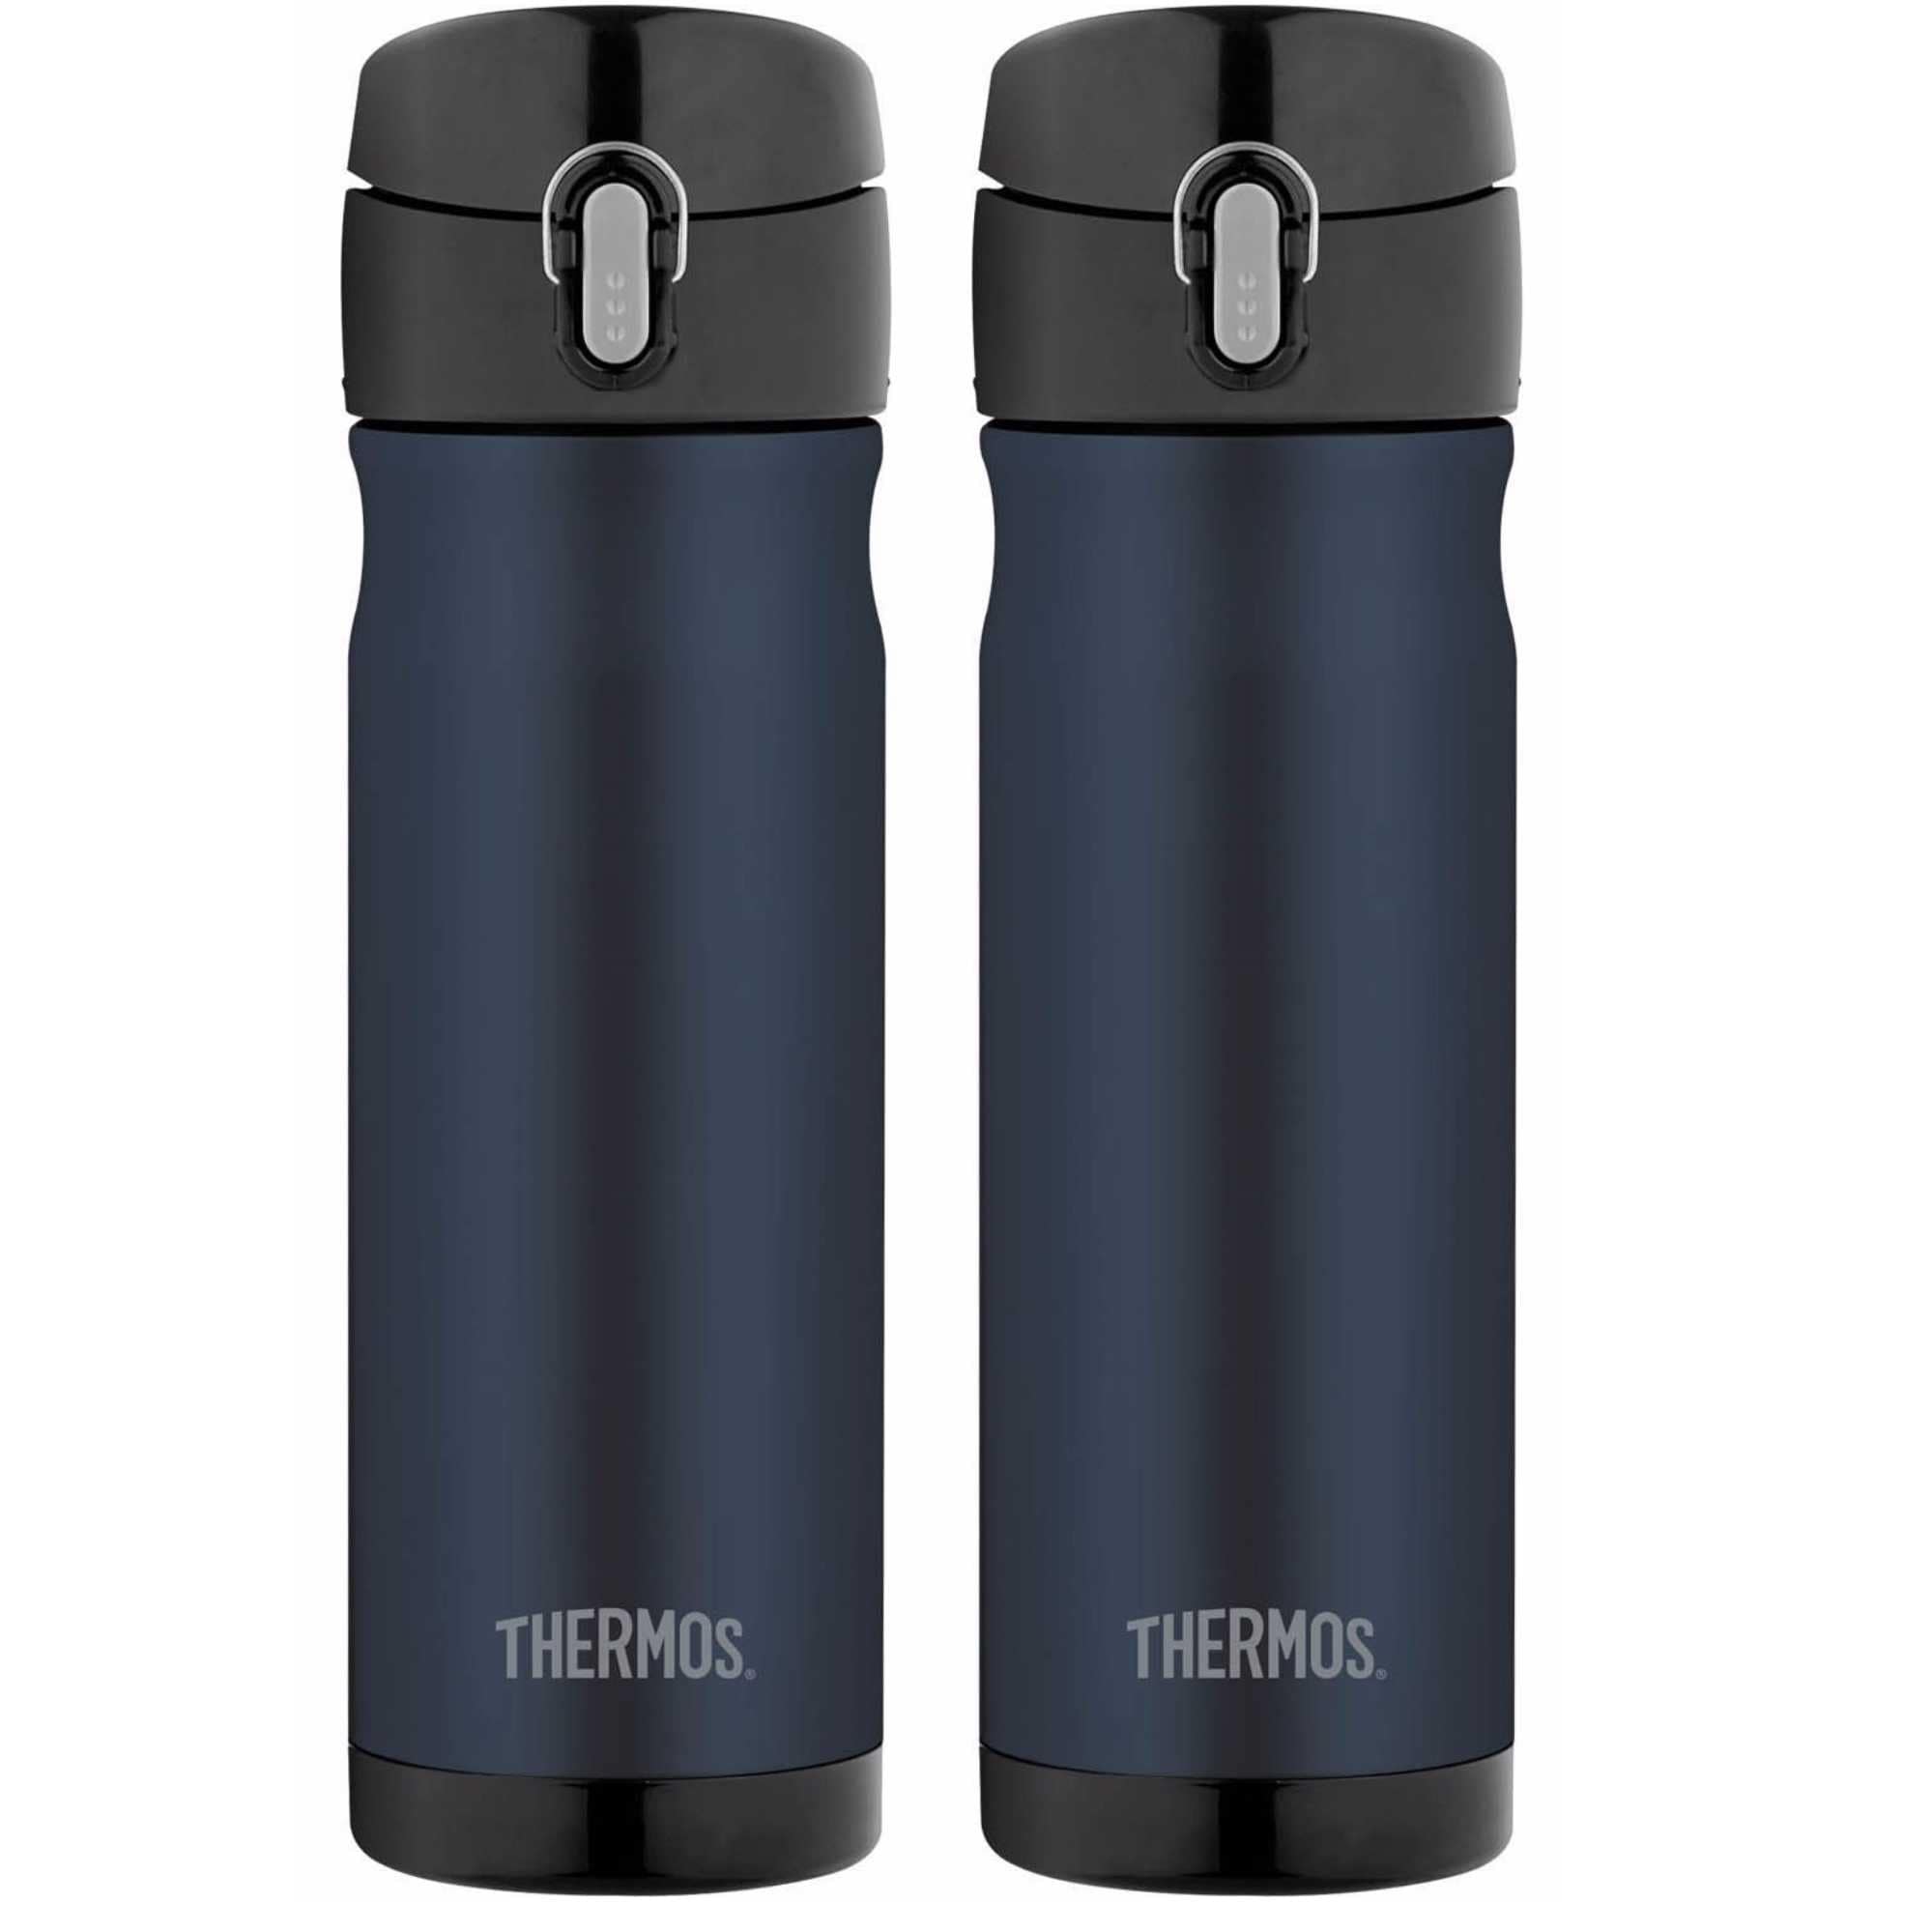 Thermos 16 Oz. Vacuum Insulated Stainless Steel Direct Drink